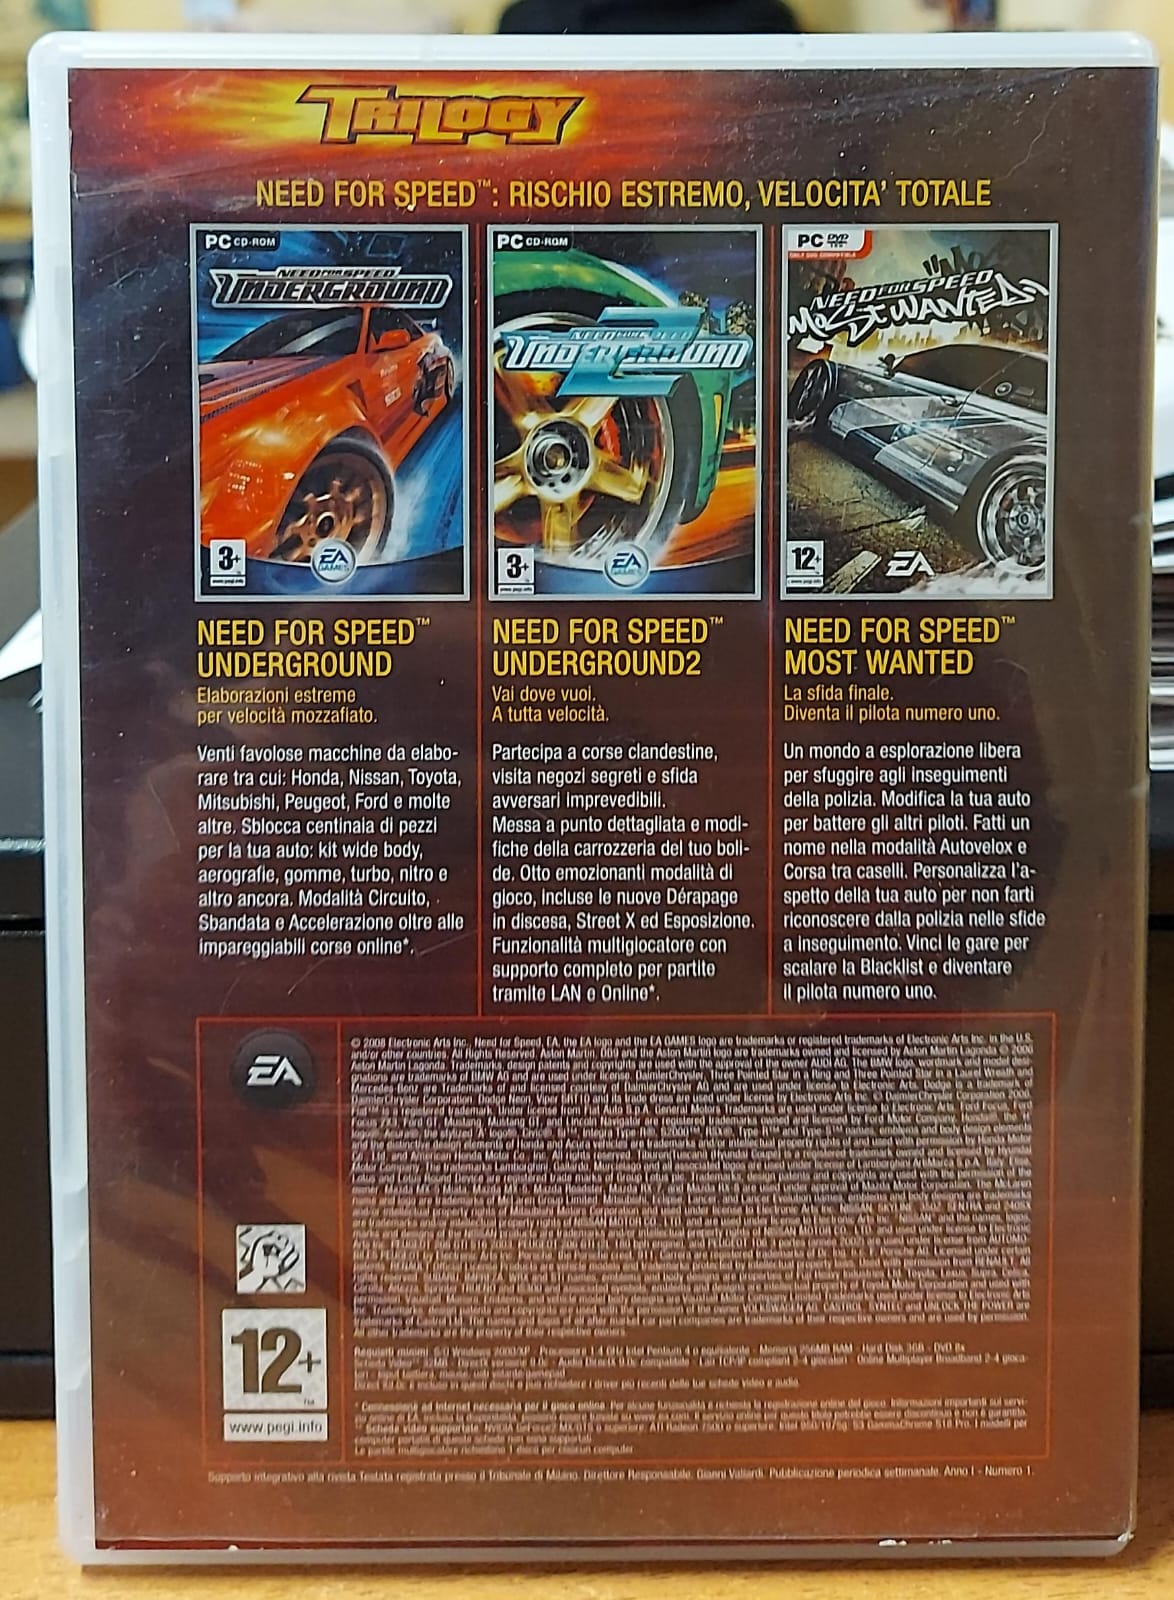 NEED FOR SPEED TRILOGY